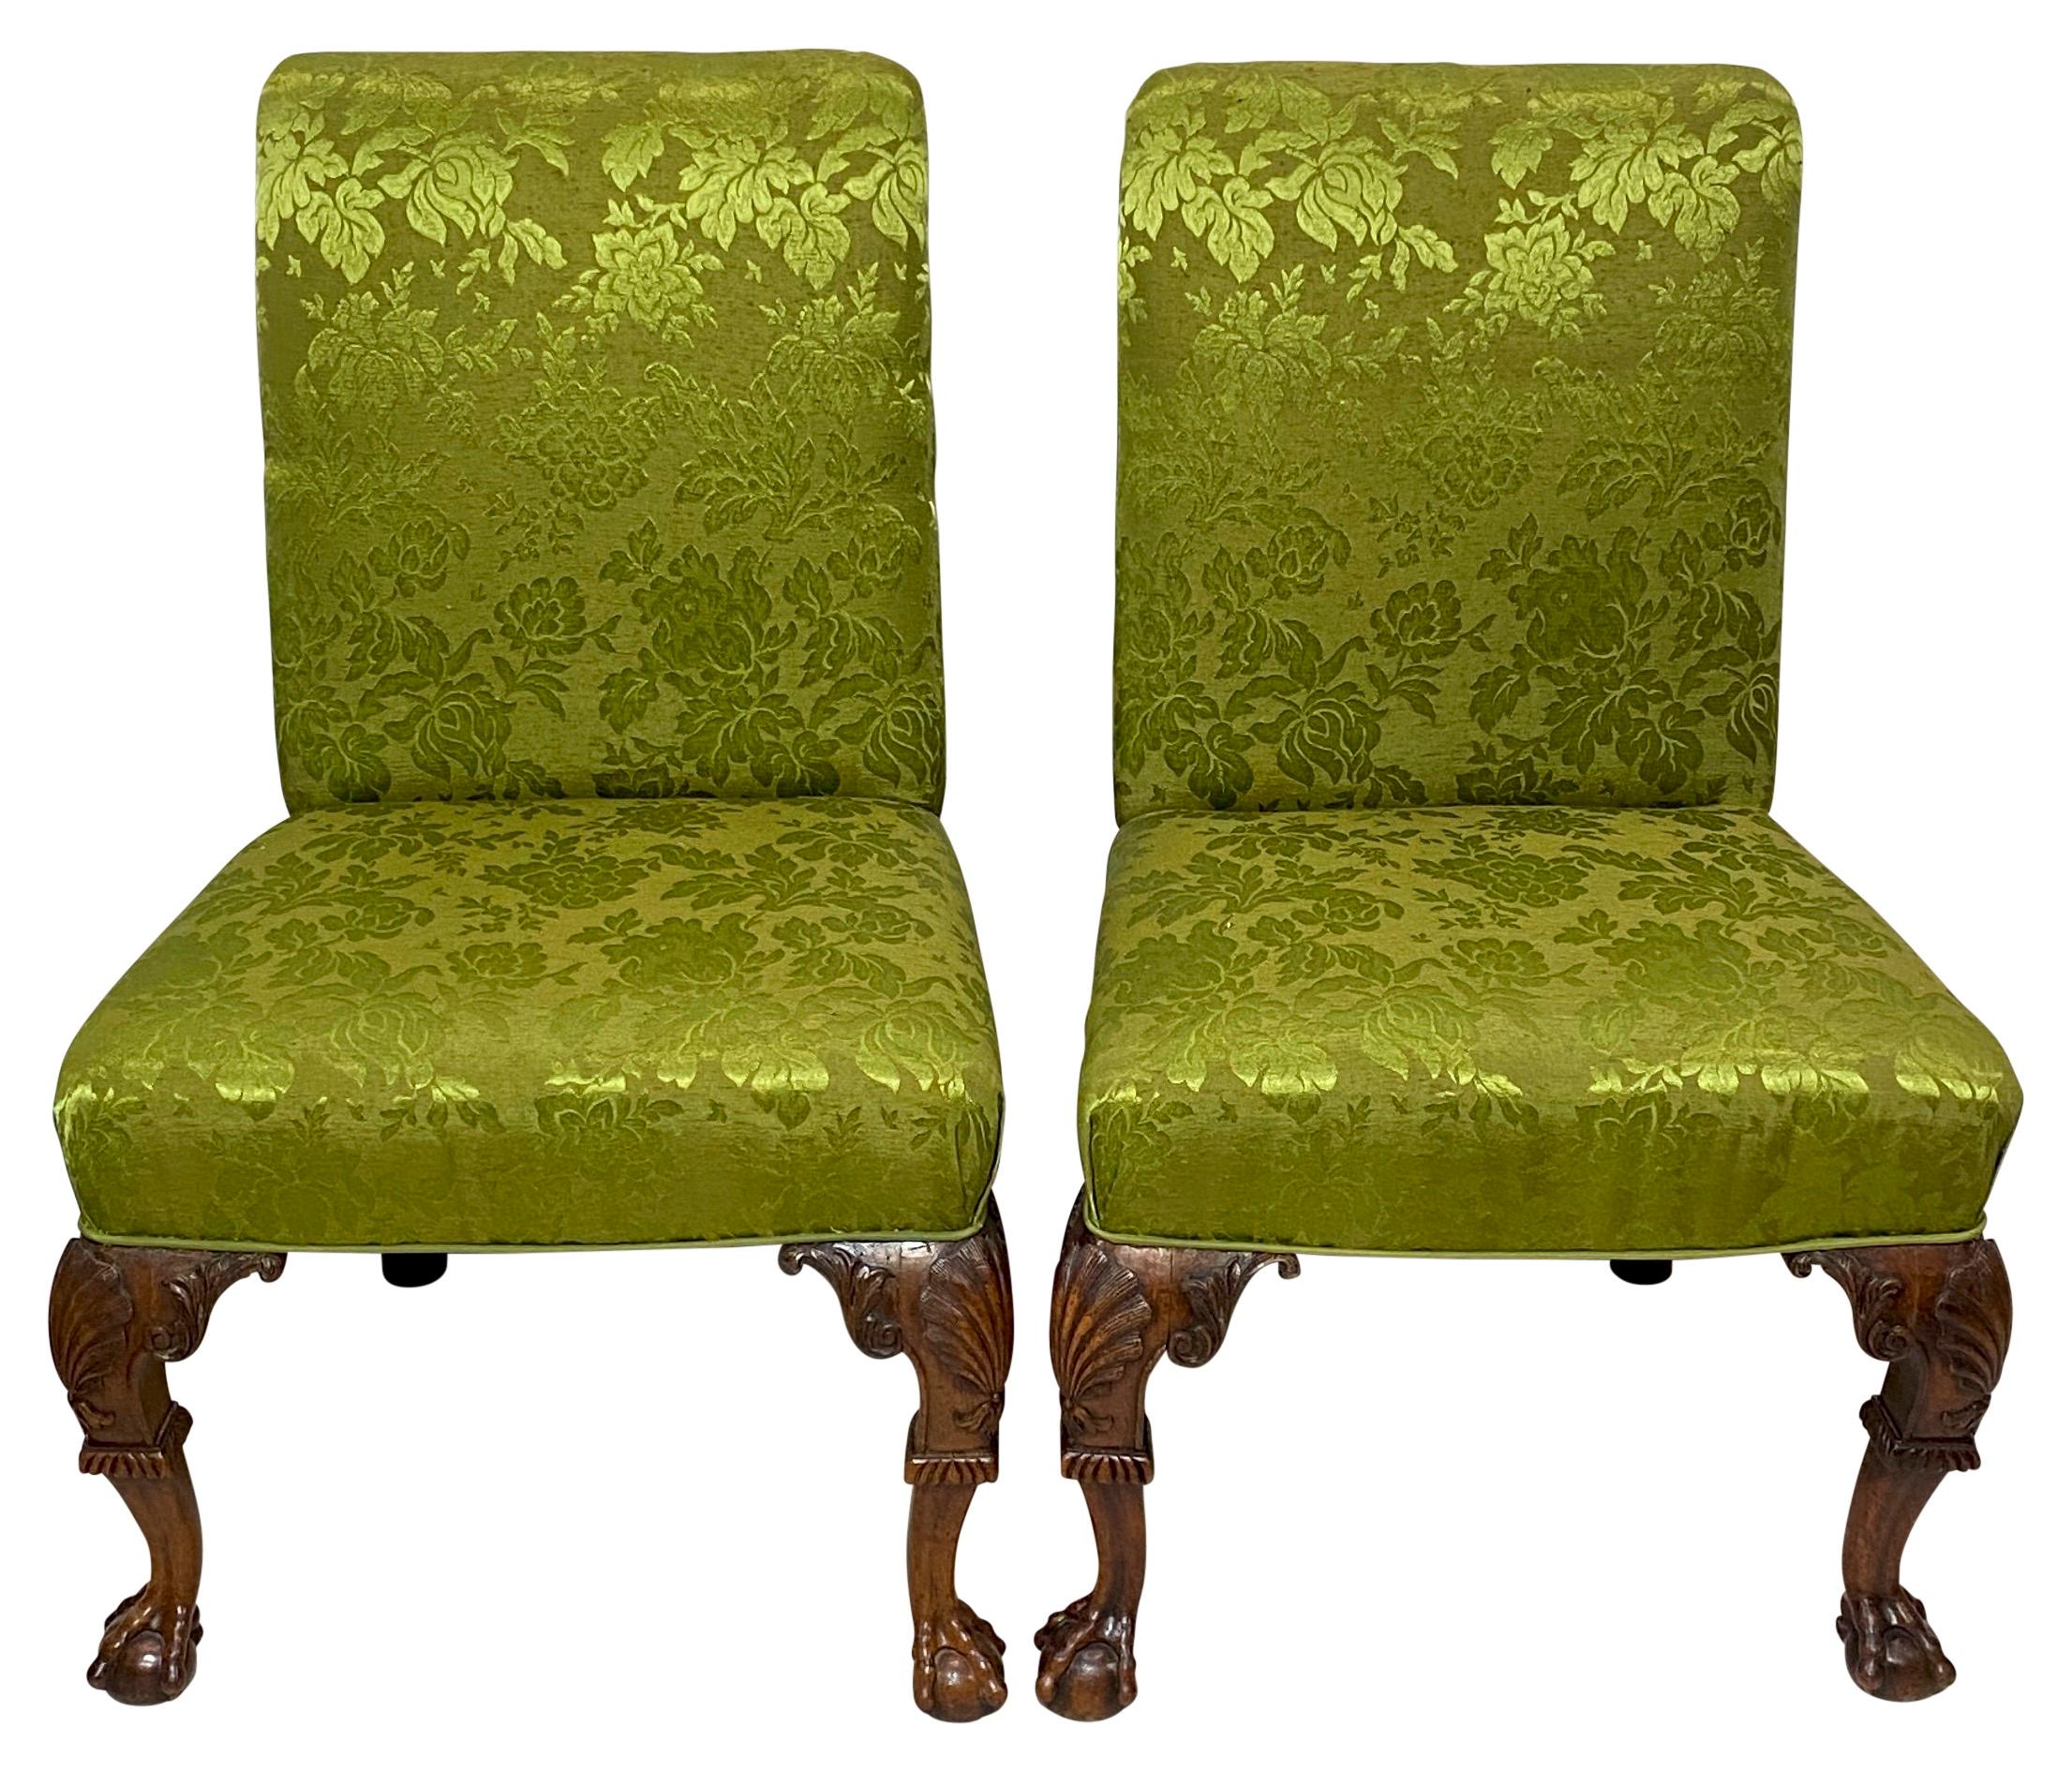 Pair of Exceptional 18th Century English Chippendale Mahogany Side Chairs For Sale 5